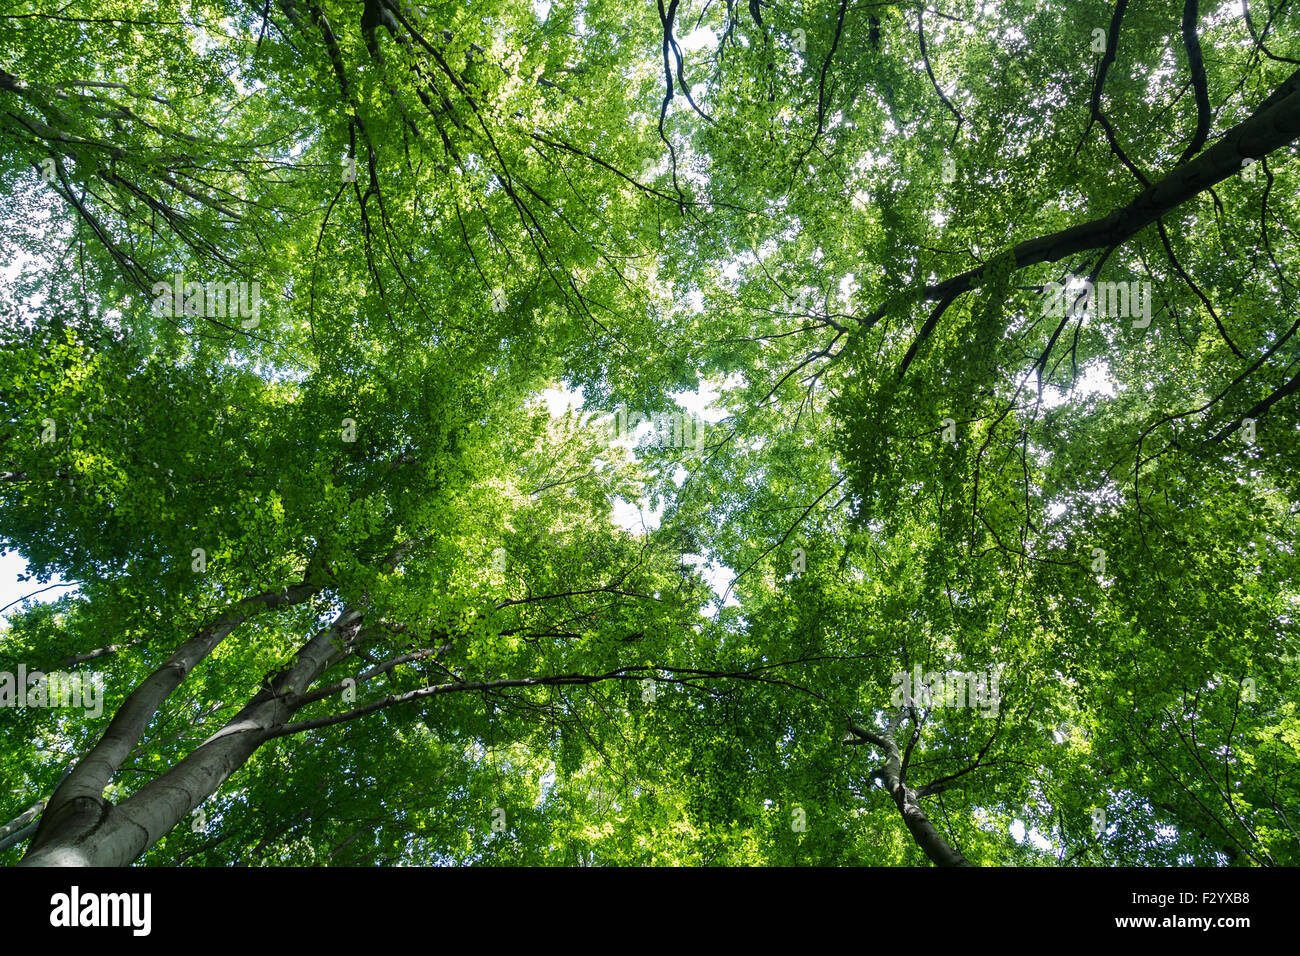 A low angle view of a tree canopy in a forest with space for text Stock Photo